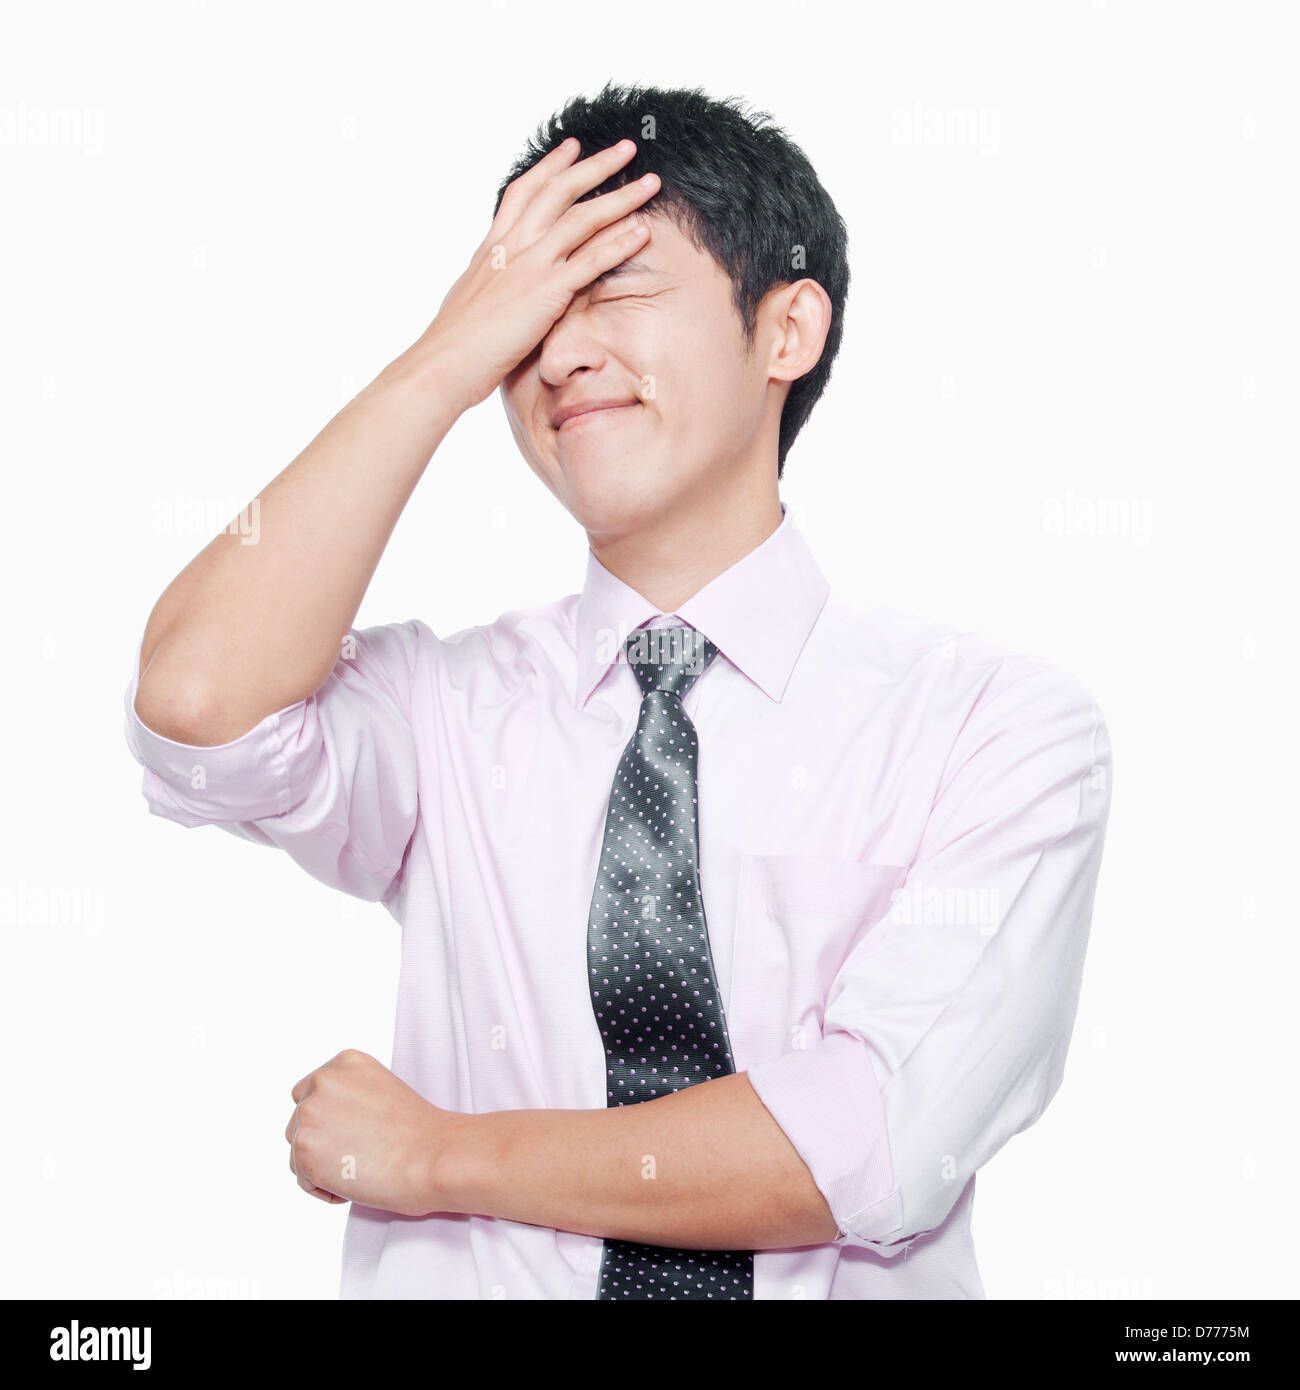 Young man with hand on forehead Stock Photo